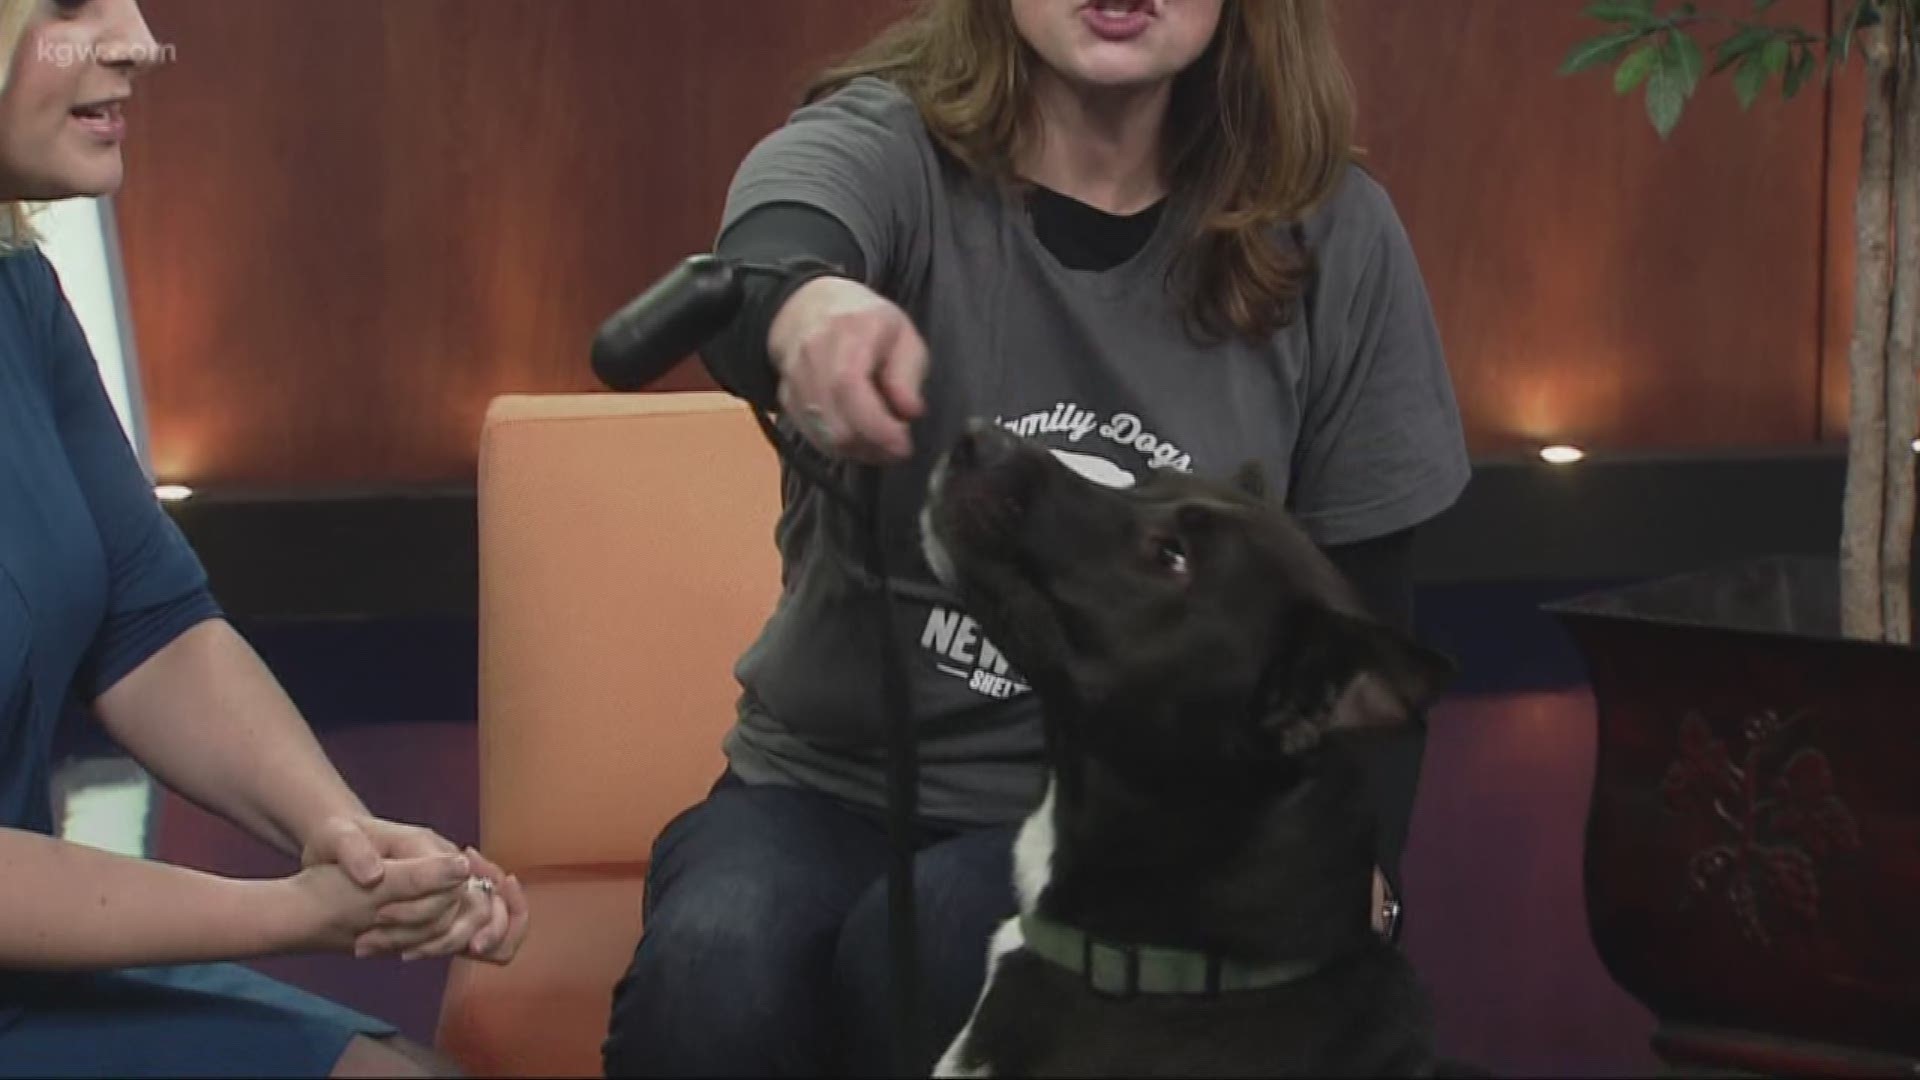 Becky Robbins of Family Dogs New Life introduces us to Duke.